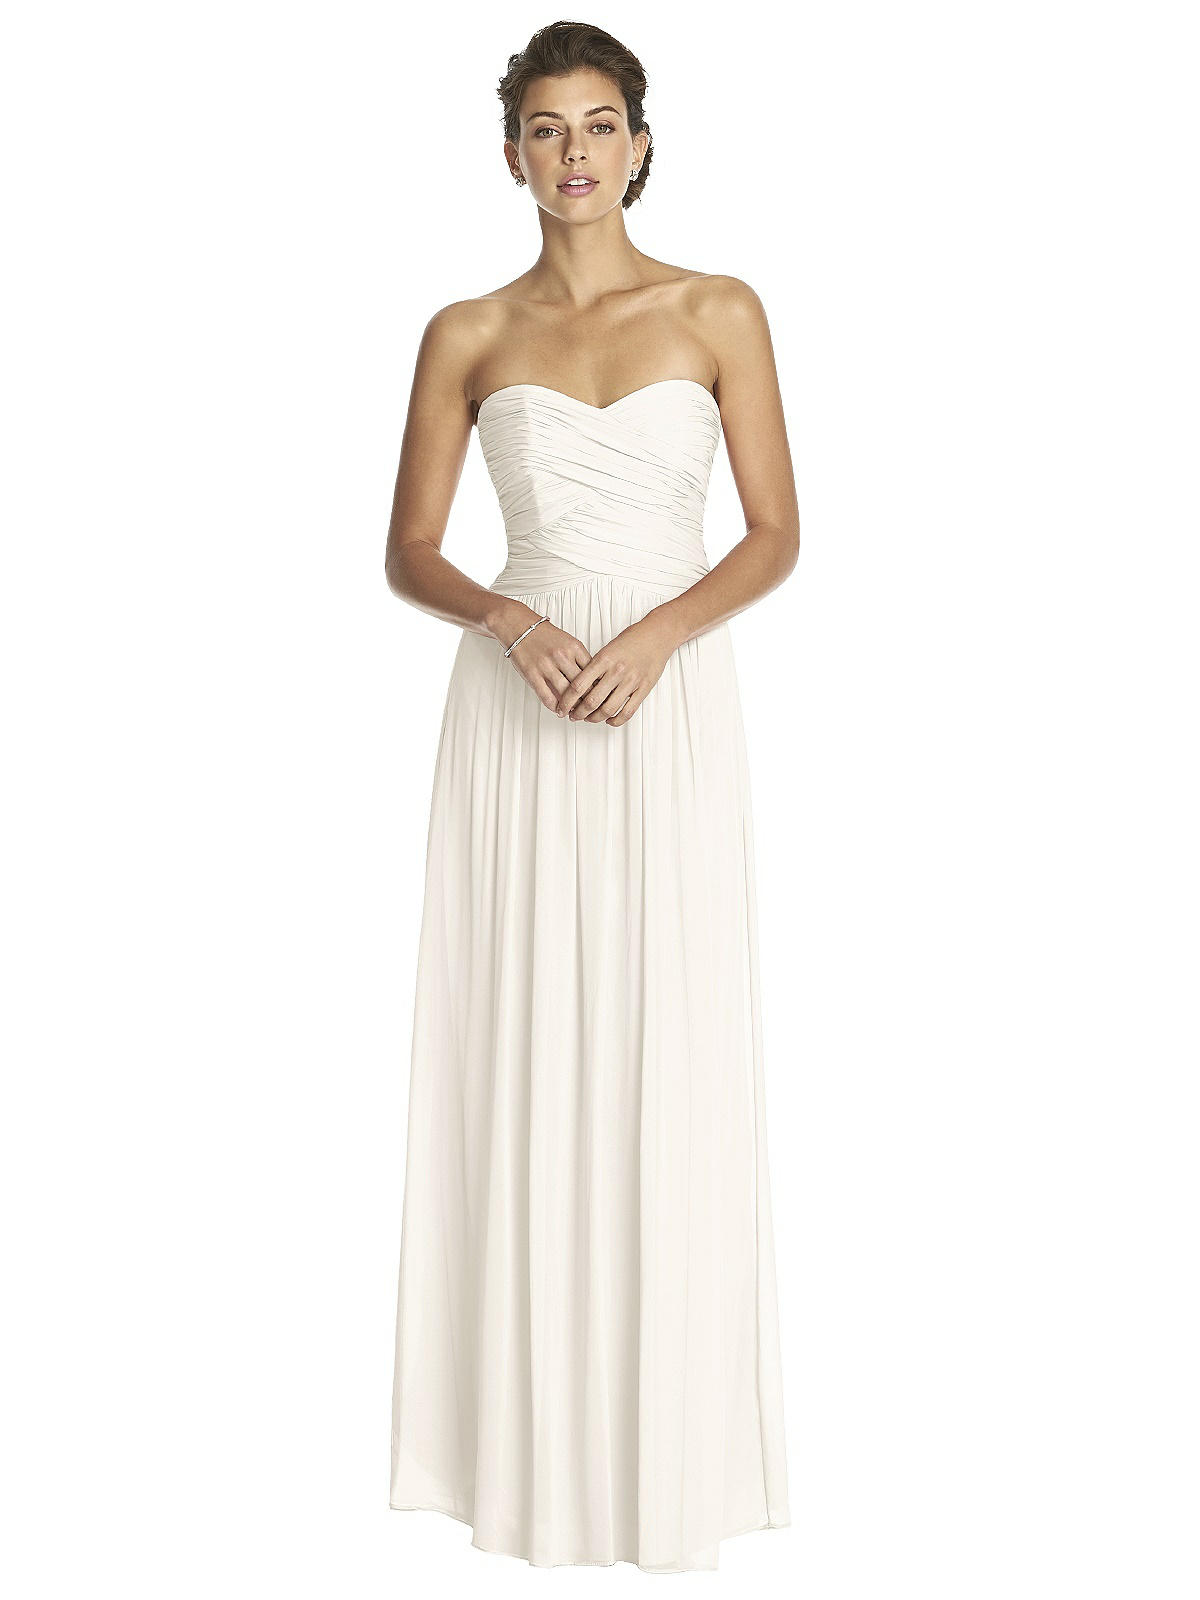 Bridesmaid Dress: Dessy Collection Style 2880 | The Dessy Group